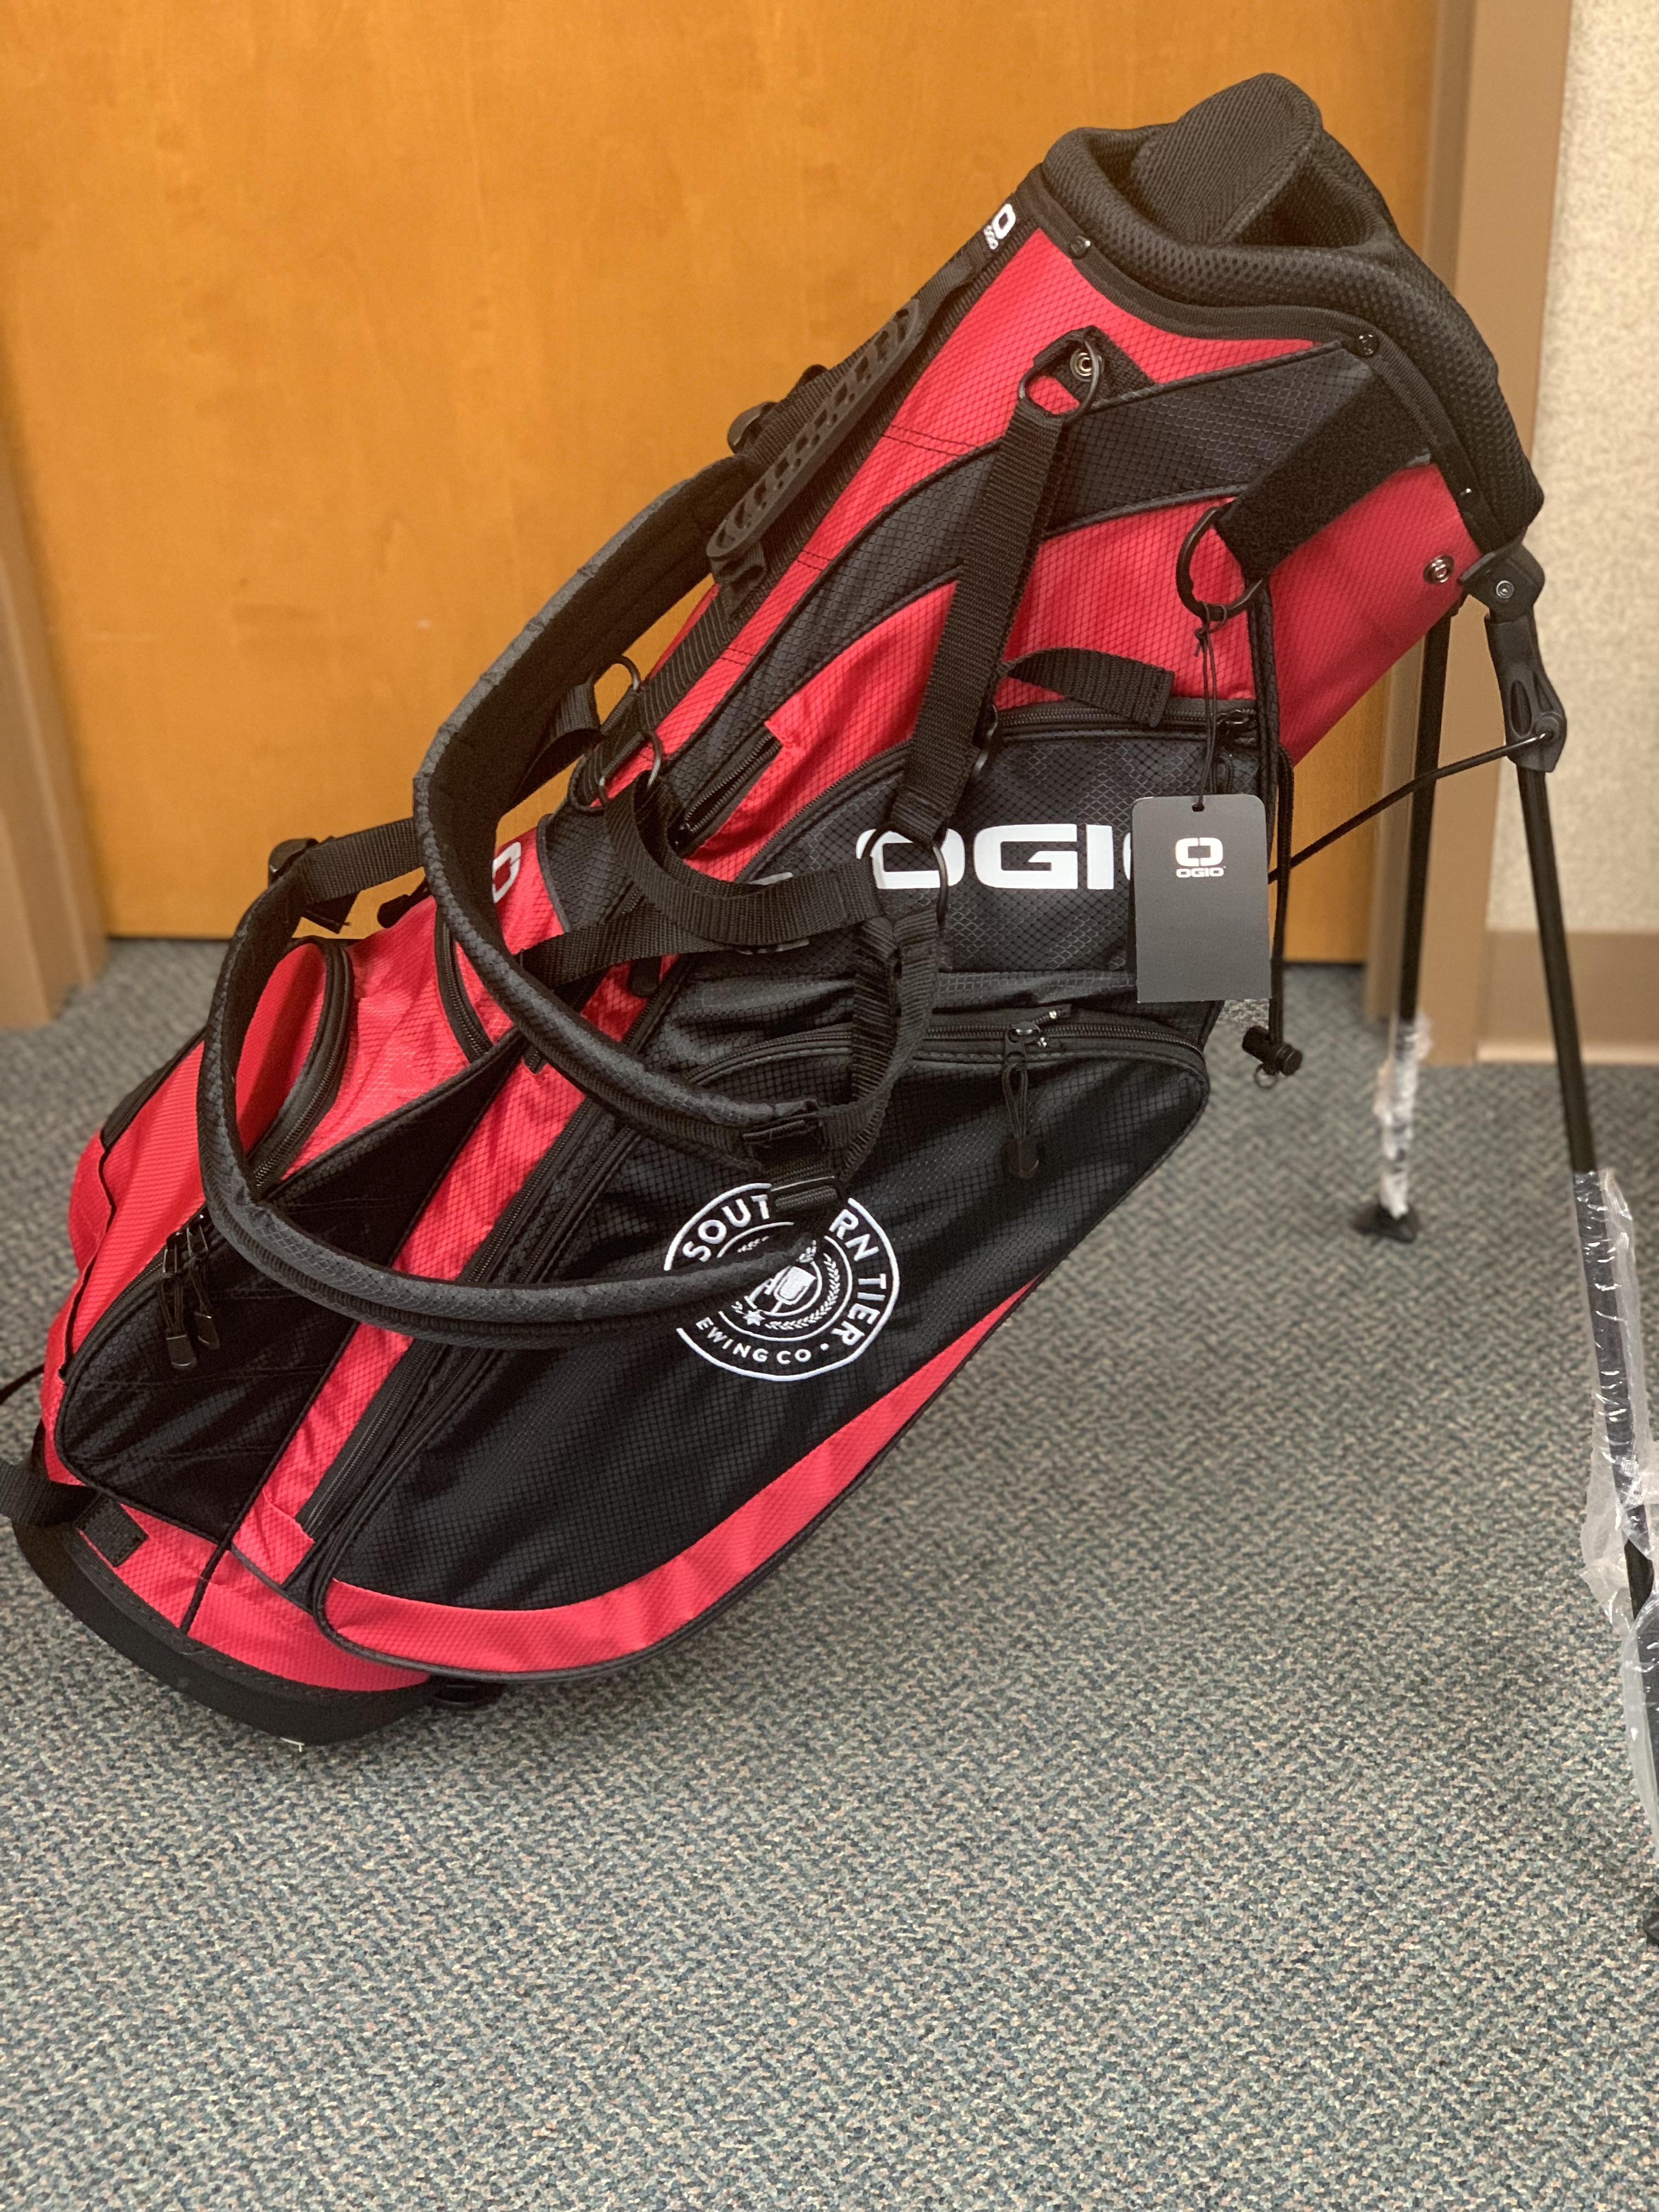 Red and black golf bag